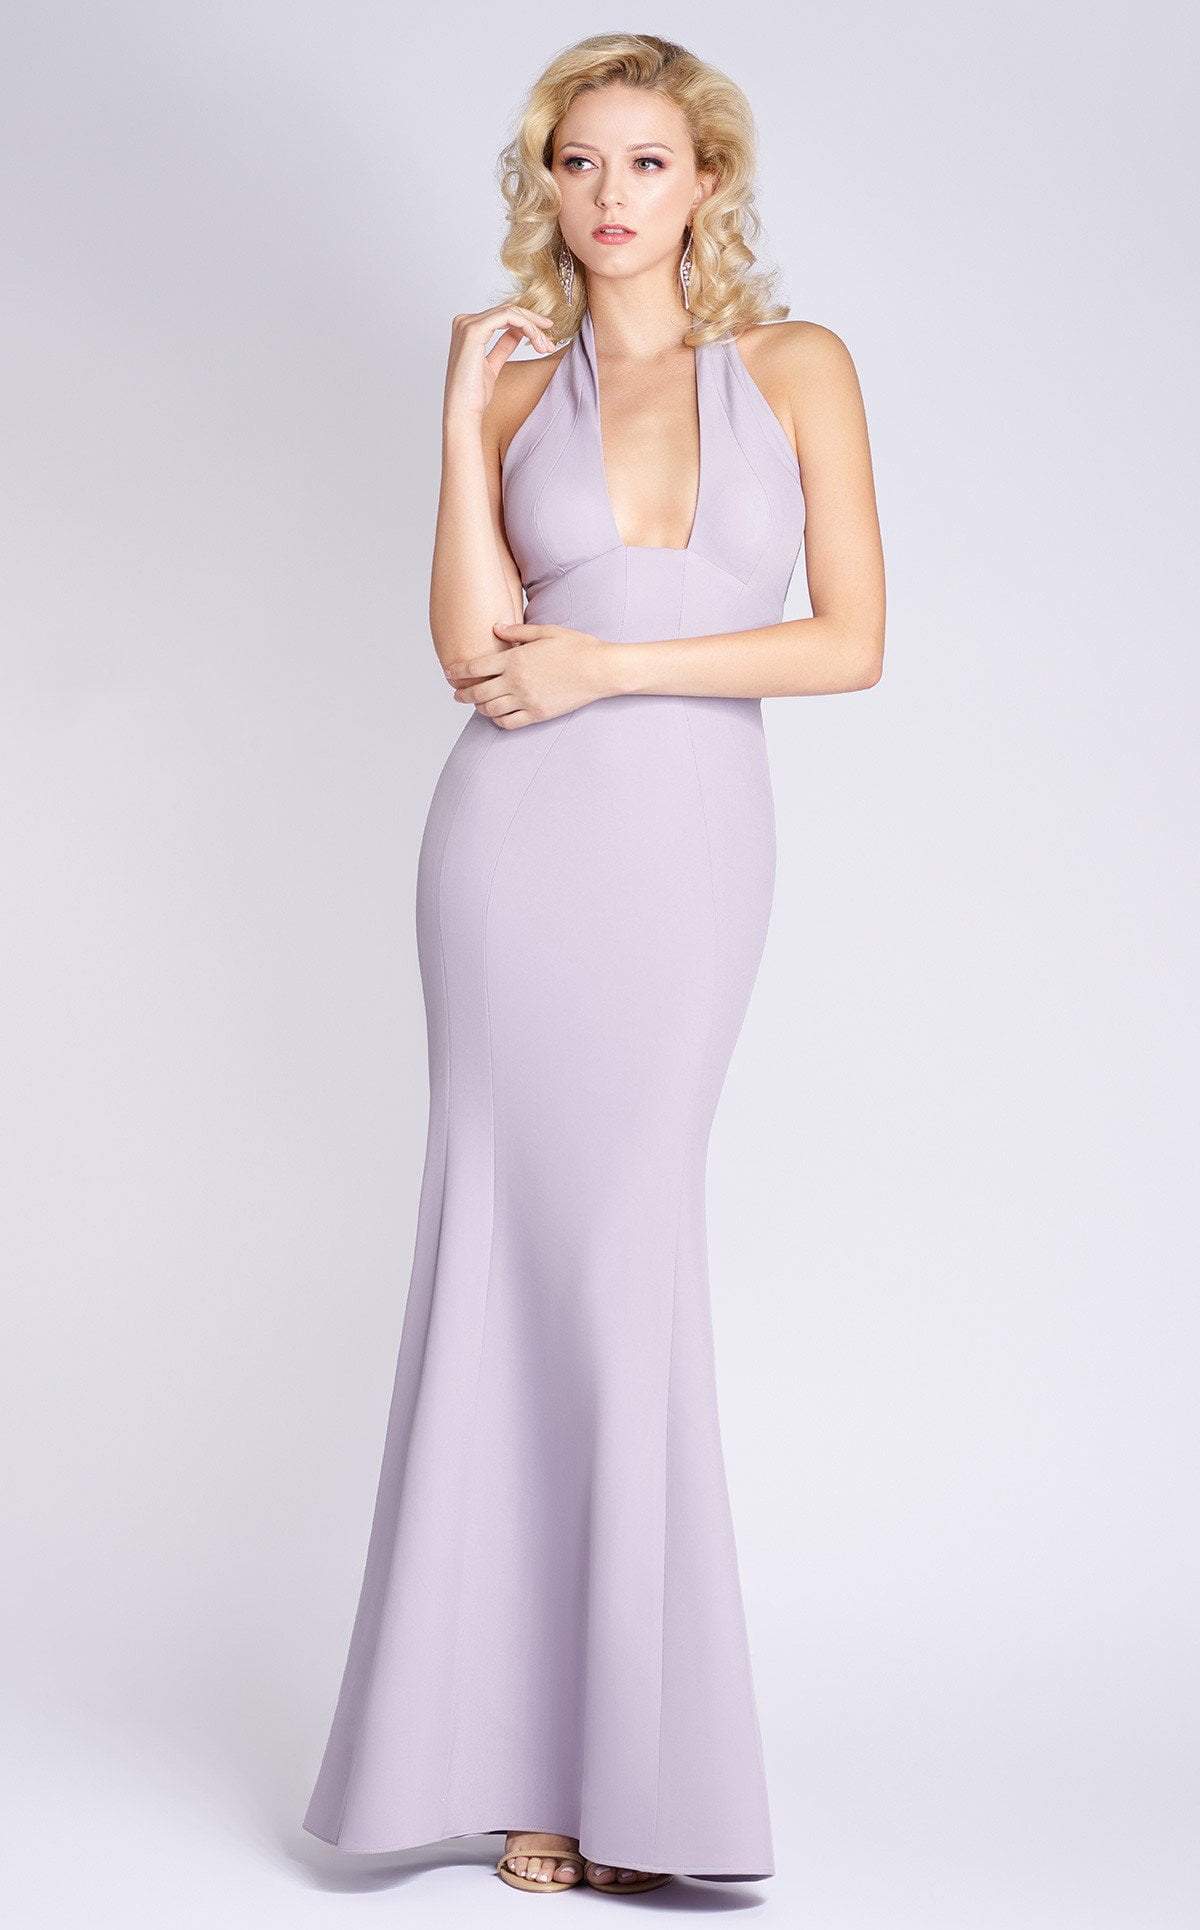 MNM COUTURE - M0004 Halter Neckline Crepe Mermaid Long Dress Special Occasion Dress 0 / Grey